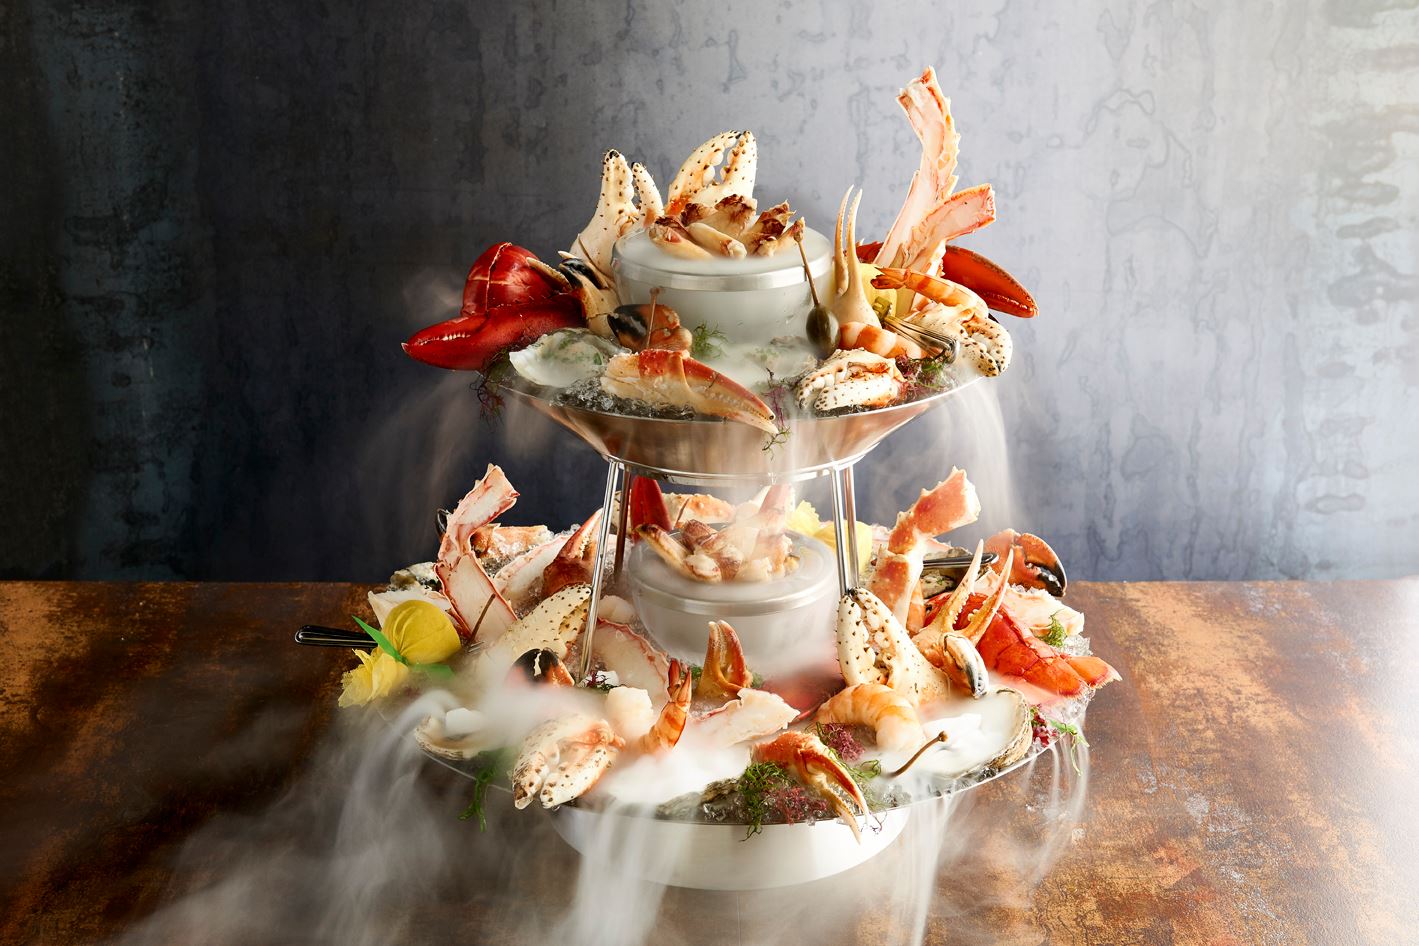 Glamour shot of a multi-tier seafood tower, garnished with plenty of crab claws and dry ice